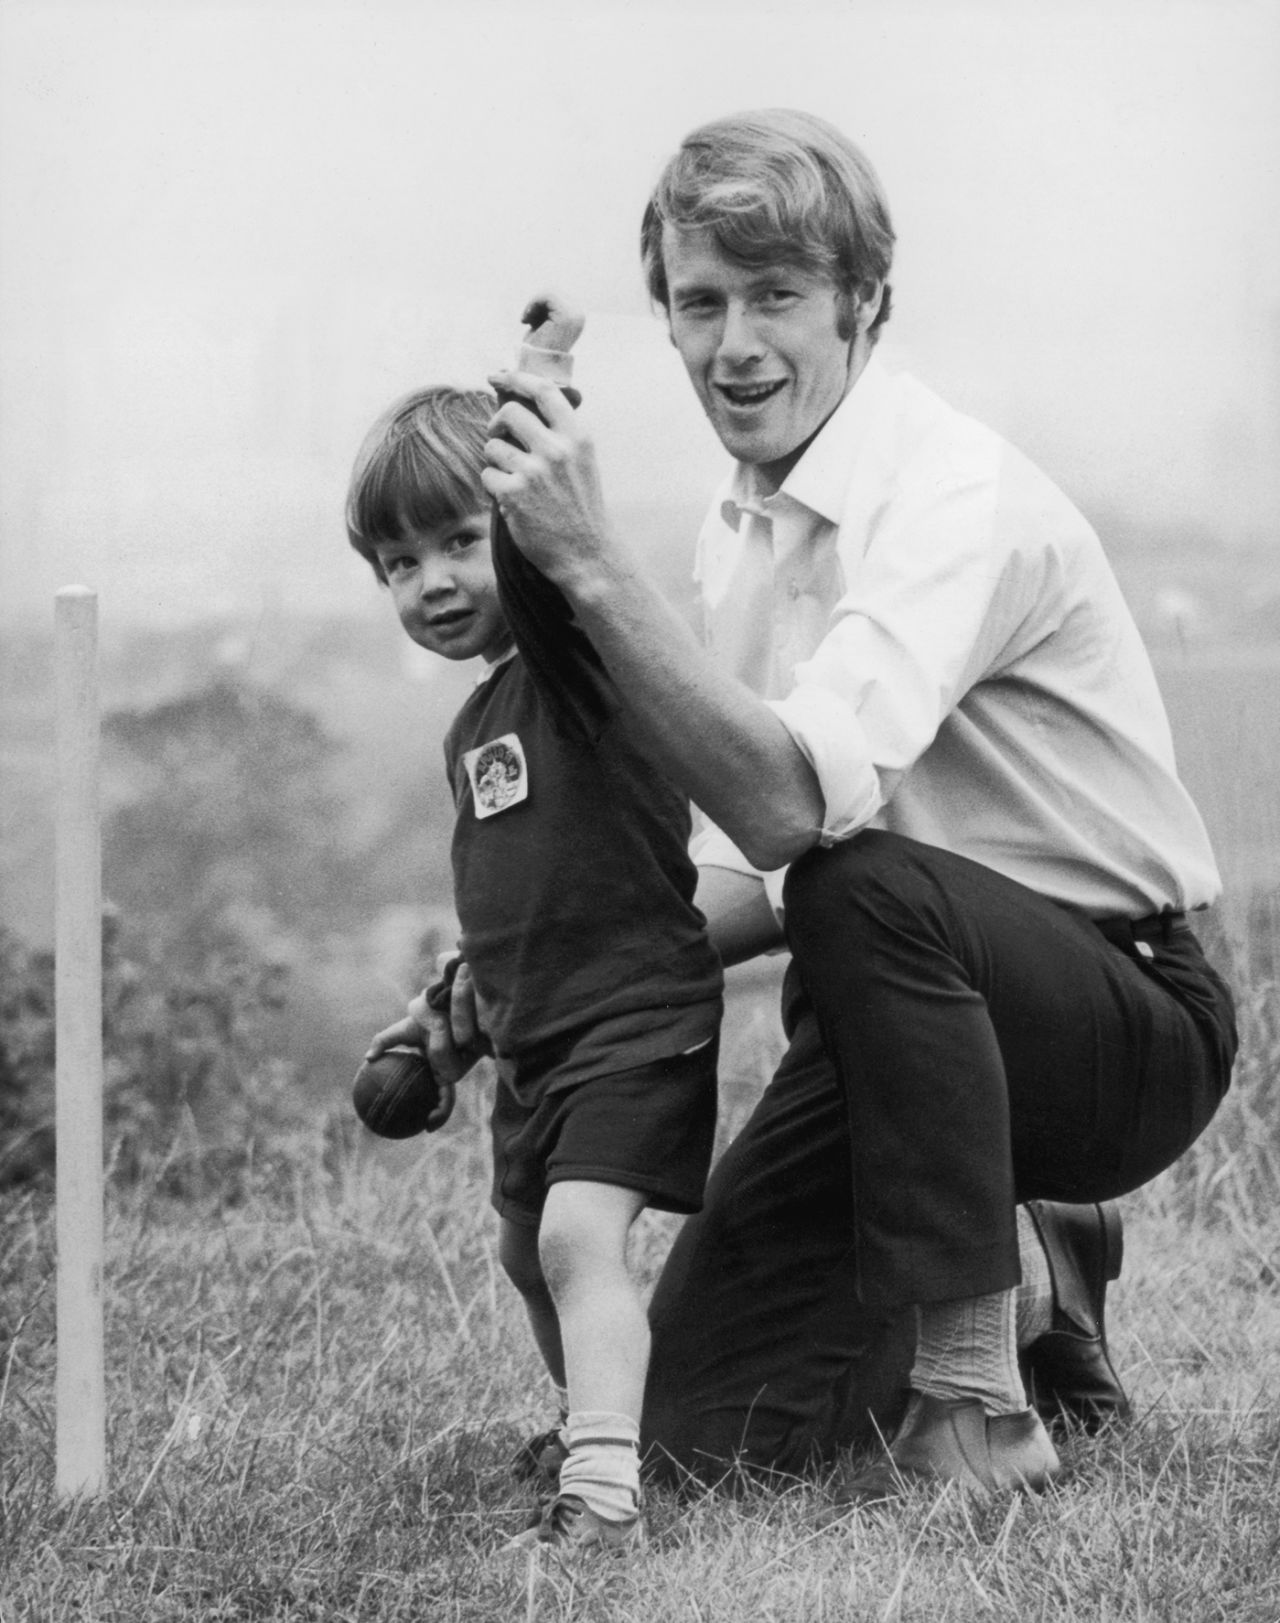 Peter Lever plays with his son Stuart, October 1970